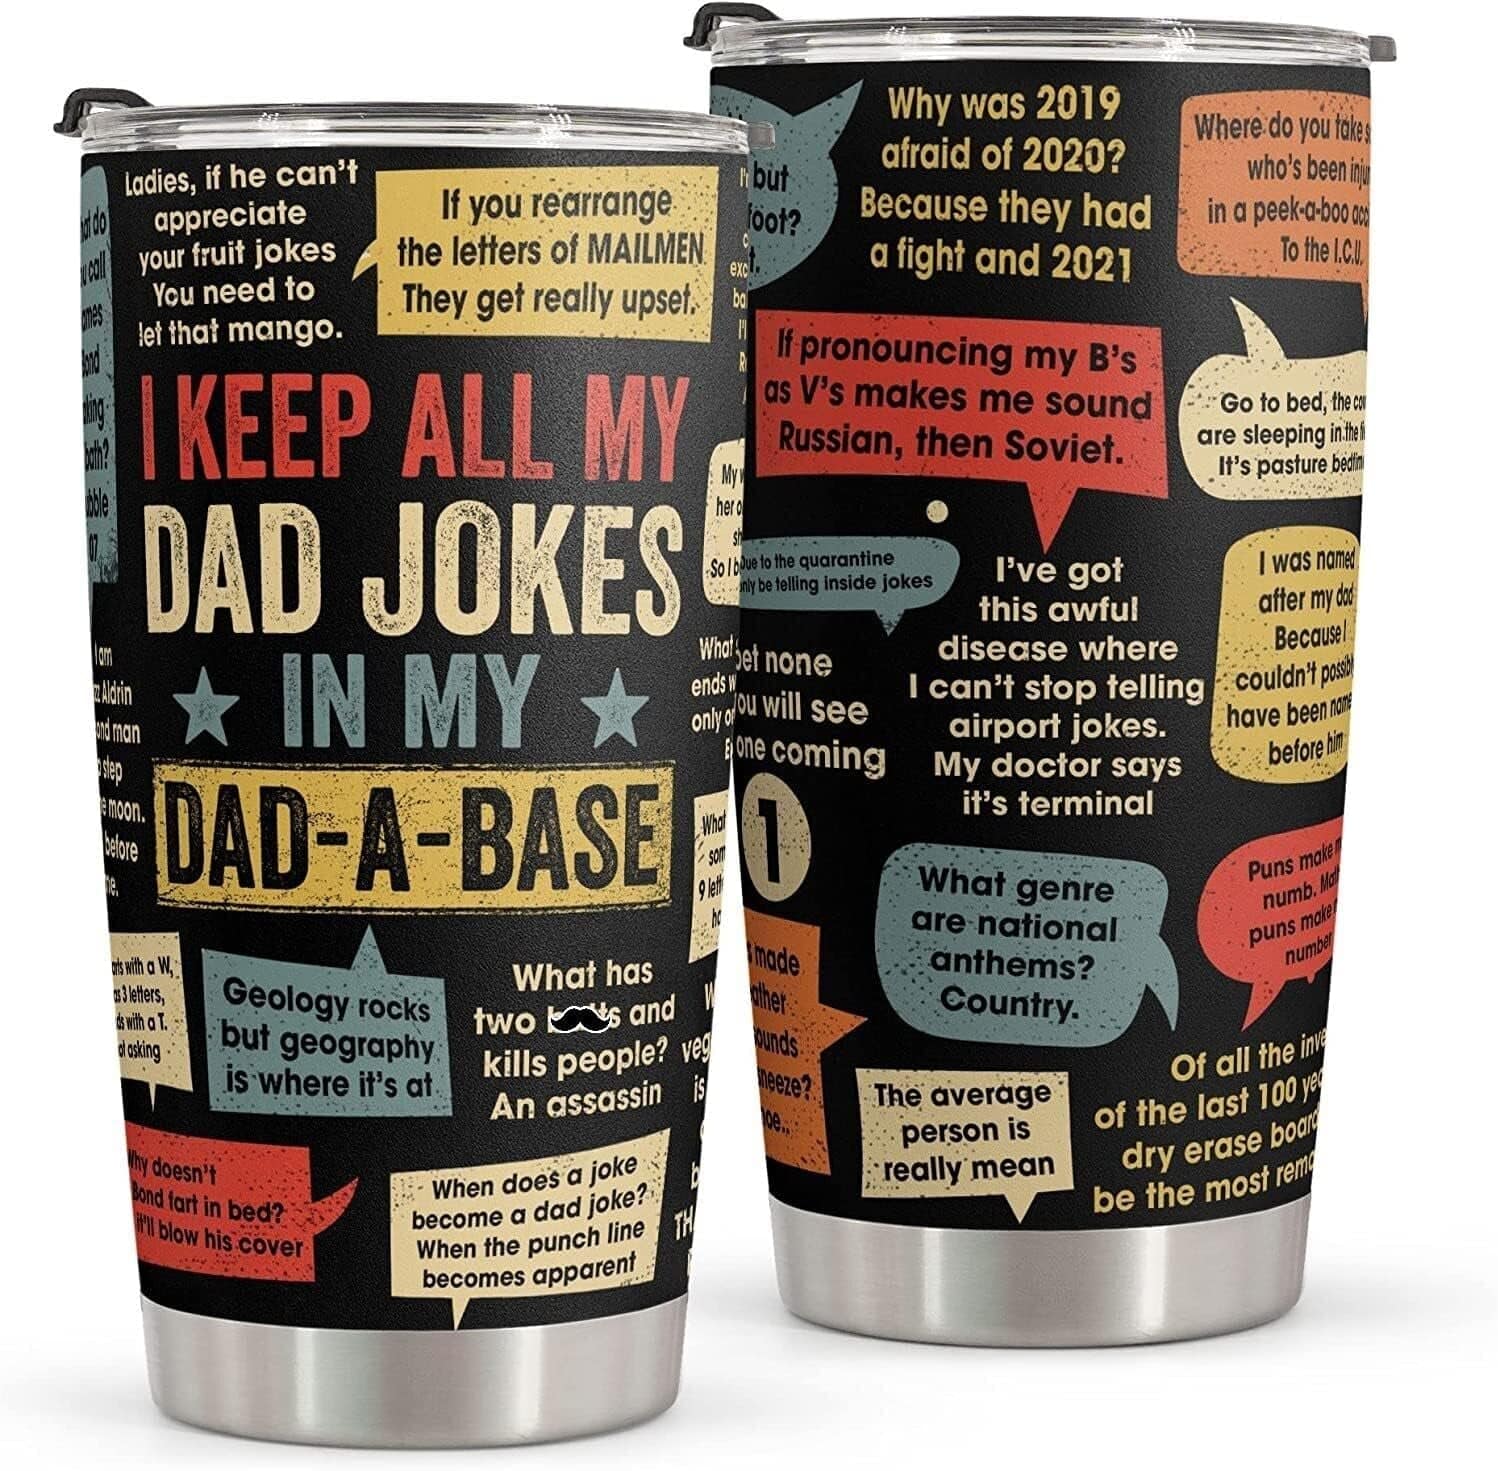 GeckoCustom Gift for Dad - Stainless Steel Tumbler 20Oz - Dad Joke Birthday Gift for Dad Men Gift - Fathers Day Gift from Daughter Son Wife - Funny Christmas Gift for Men Dad Stepdad Bonus Dad Uncle Jokes